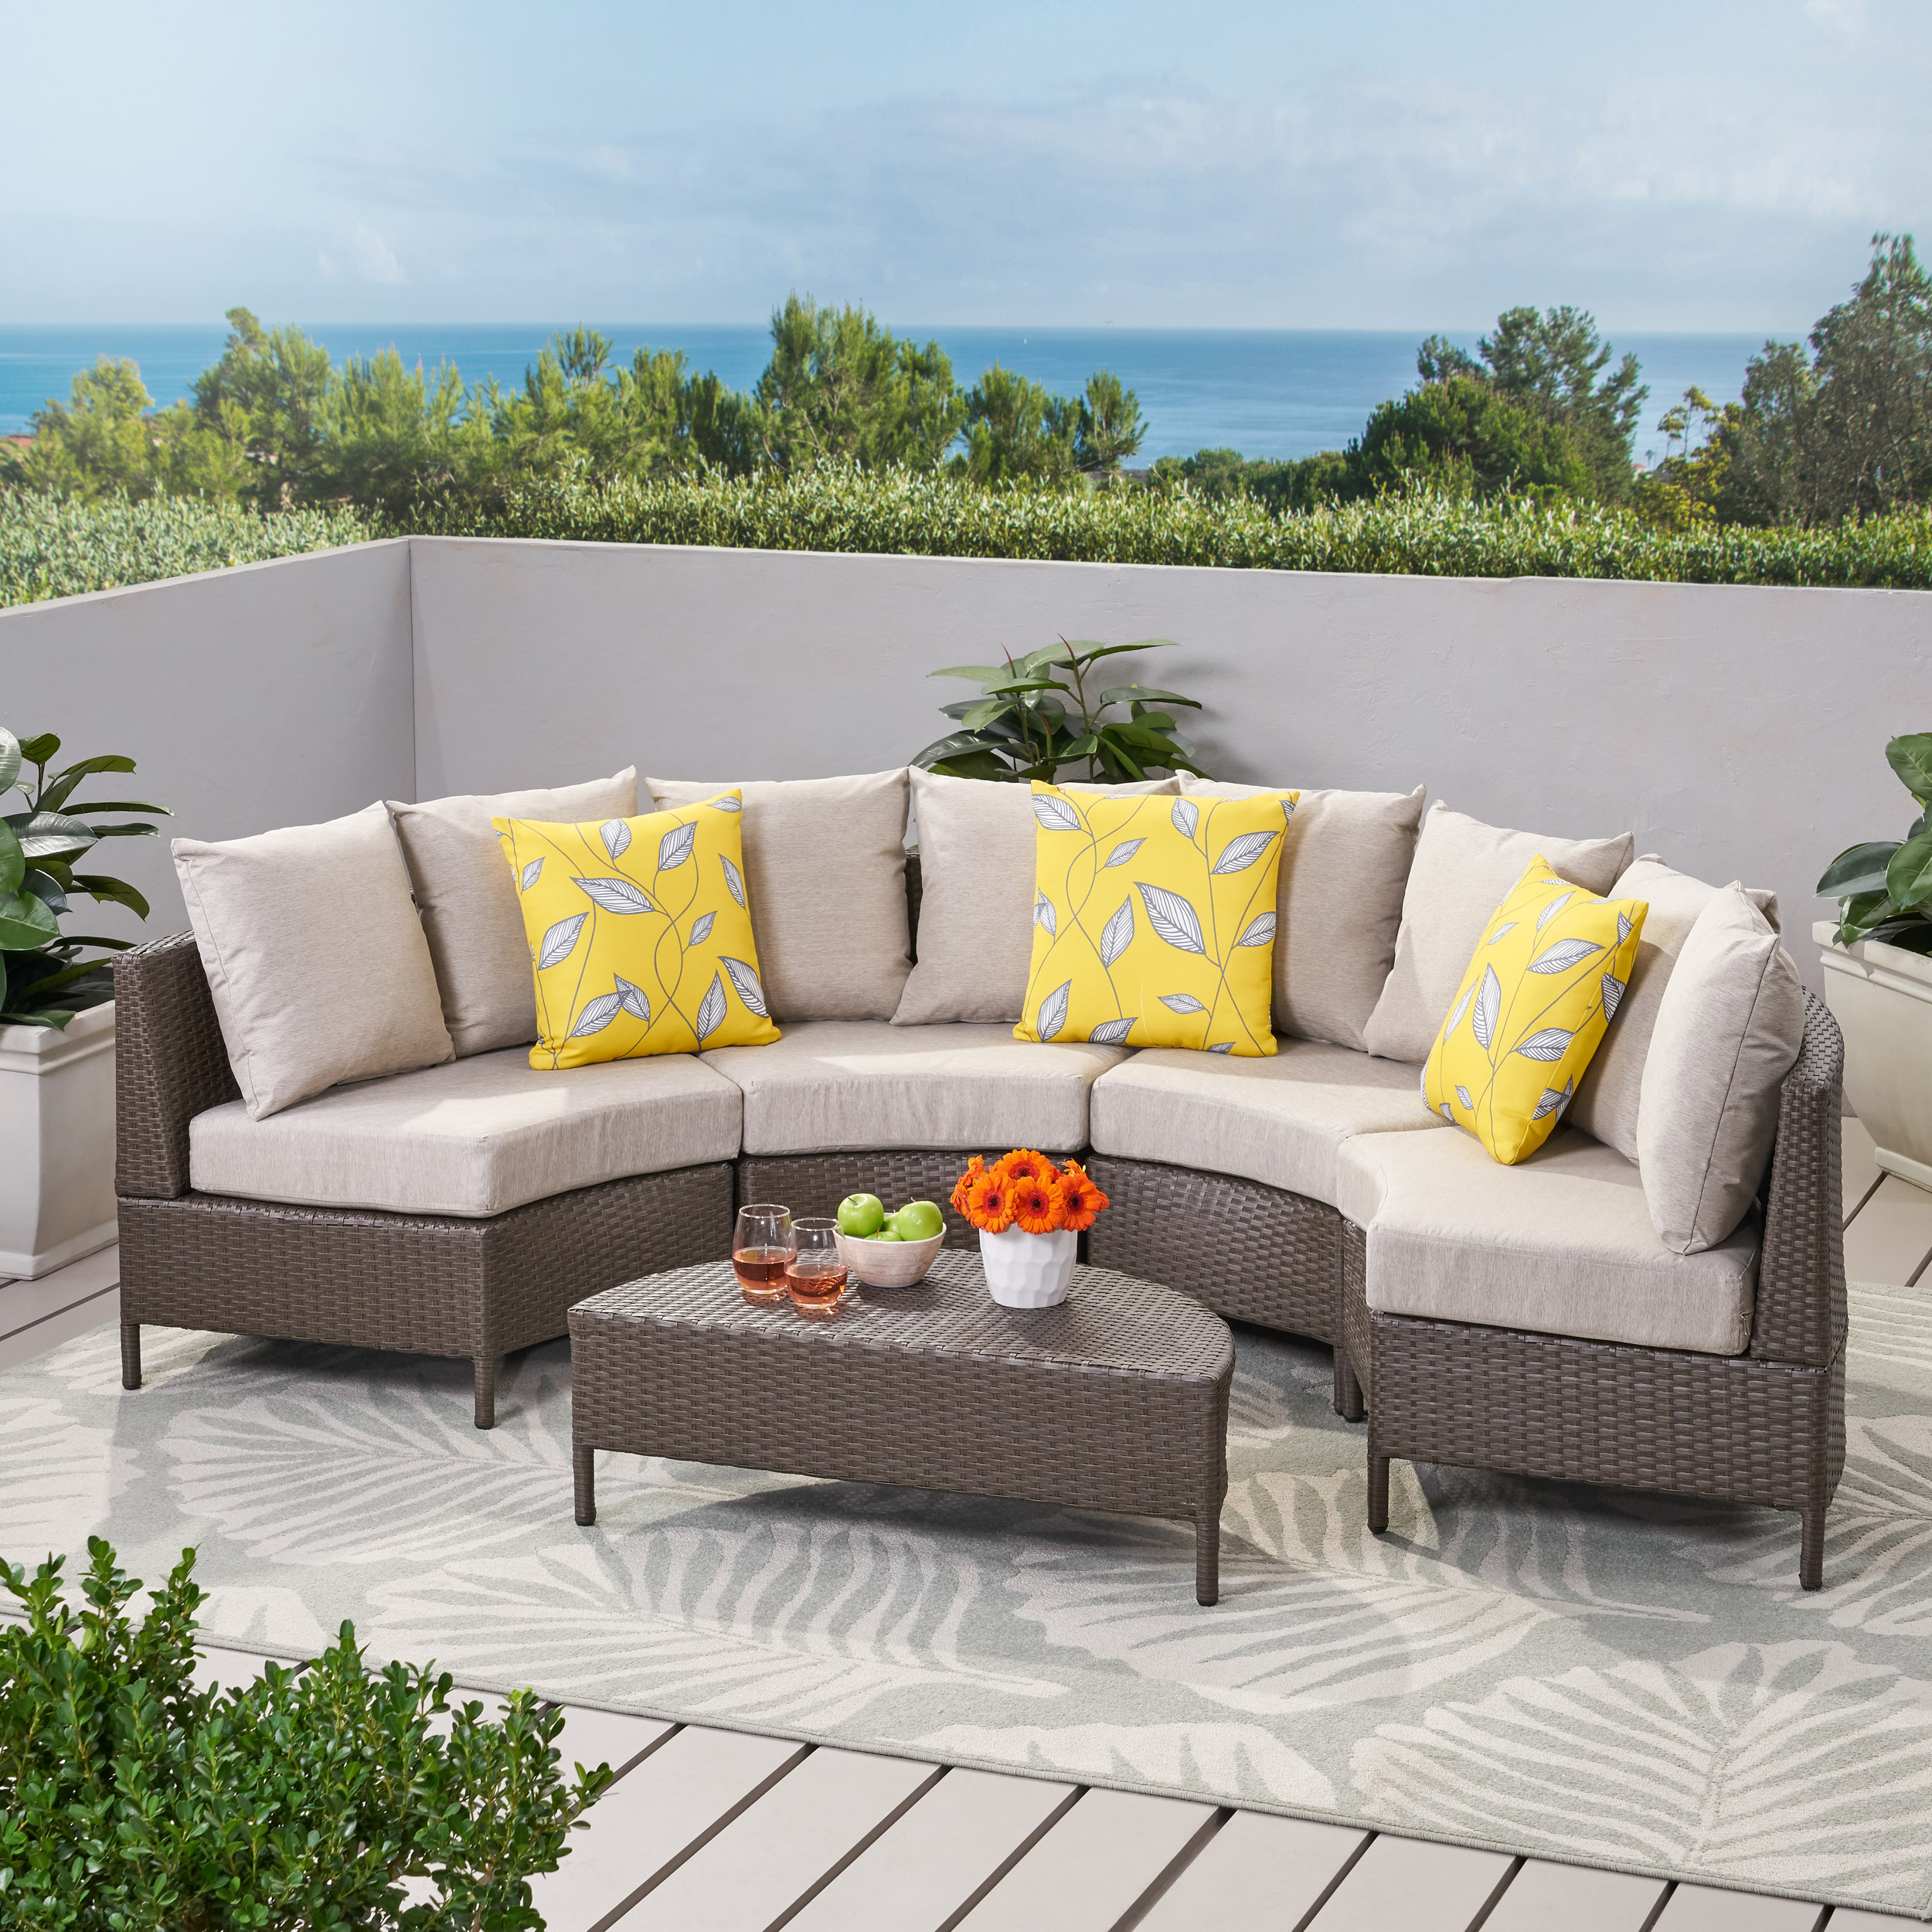 Alacati Outdoor 5-Piece Wicker Sofa Set With Water Resistant Cushions